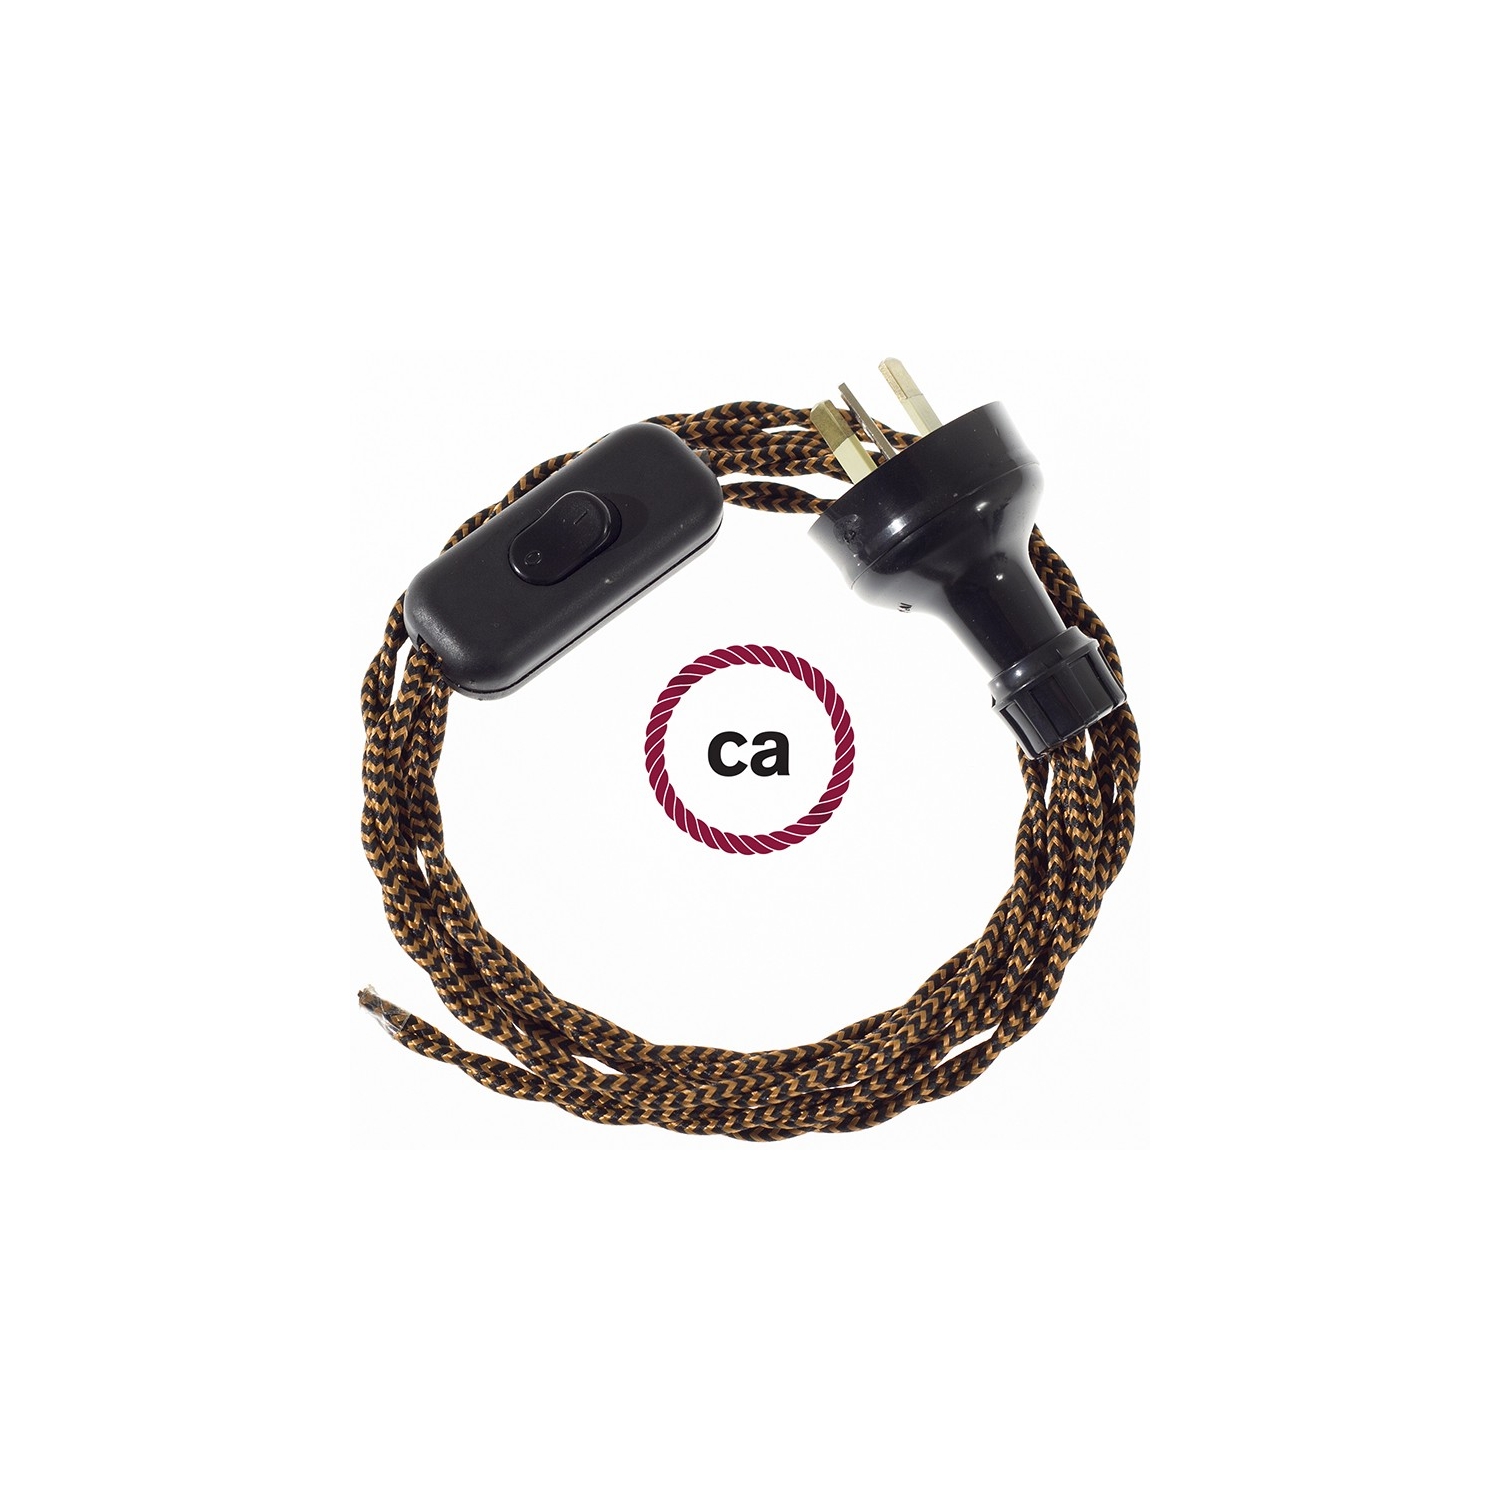 Wiring Black e Whiskey Rayon textile cable TZ22 - 1.80 mt